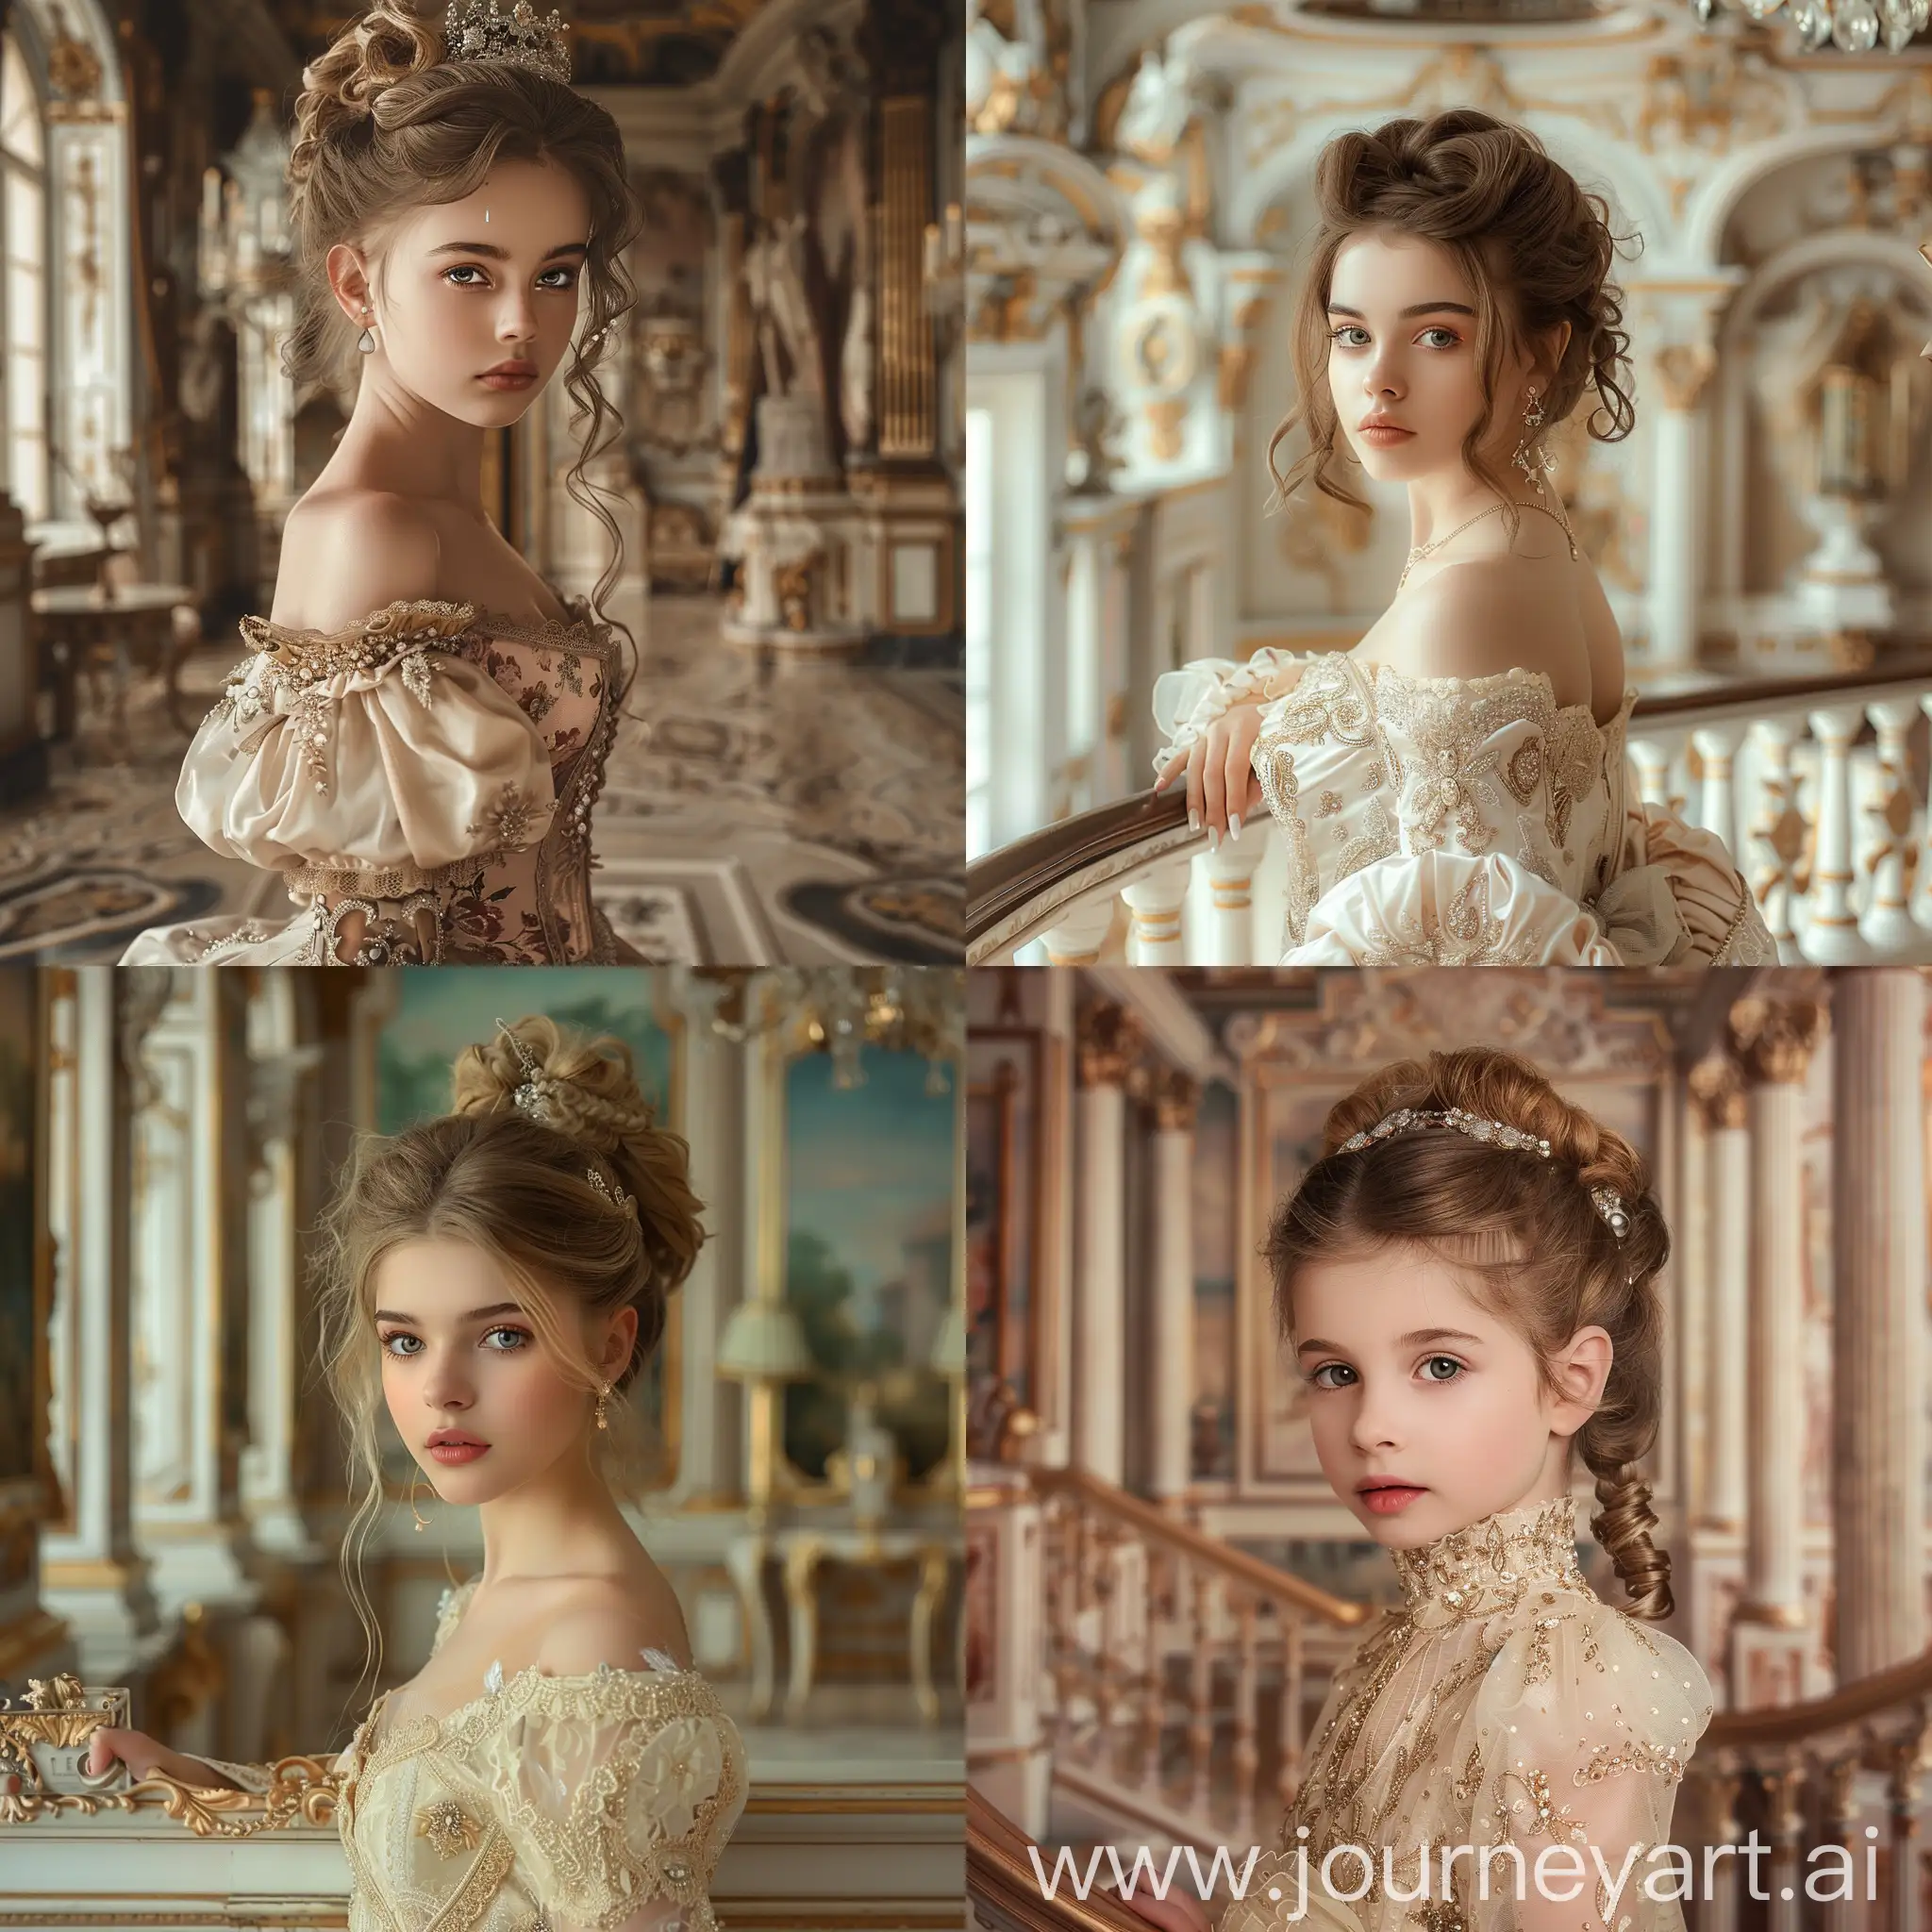 Very real photo of a very beautiful girl, wearing a royal princess dress, in a royal and beautiful house, perfect pose for photography, a masterpiece of quality and beauty, royal style hairstyle, wearing perfume, studio photo, serious, beautiful